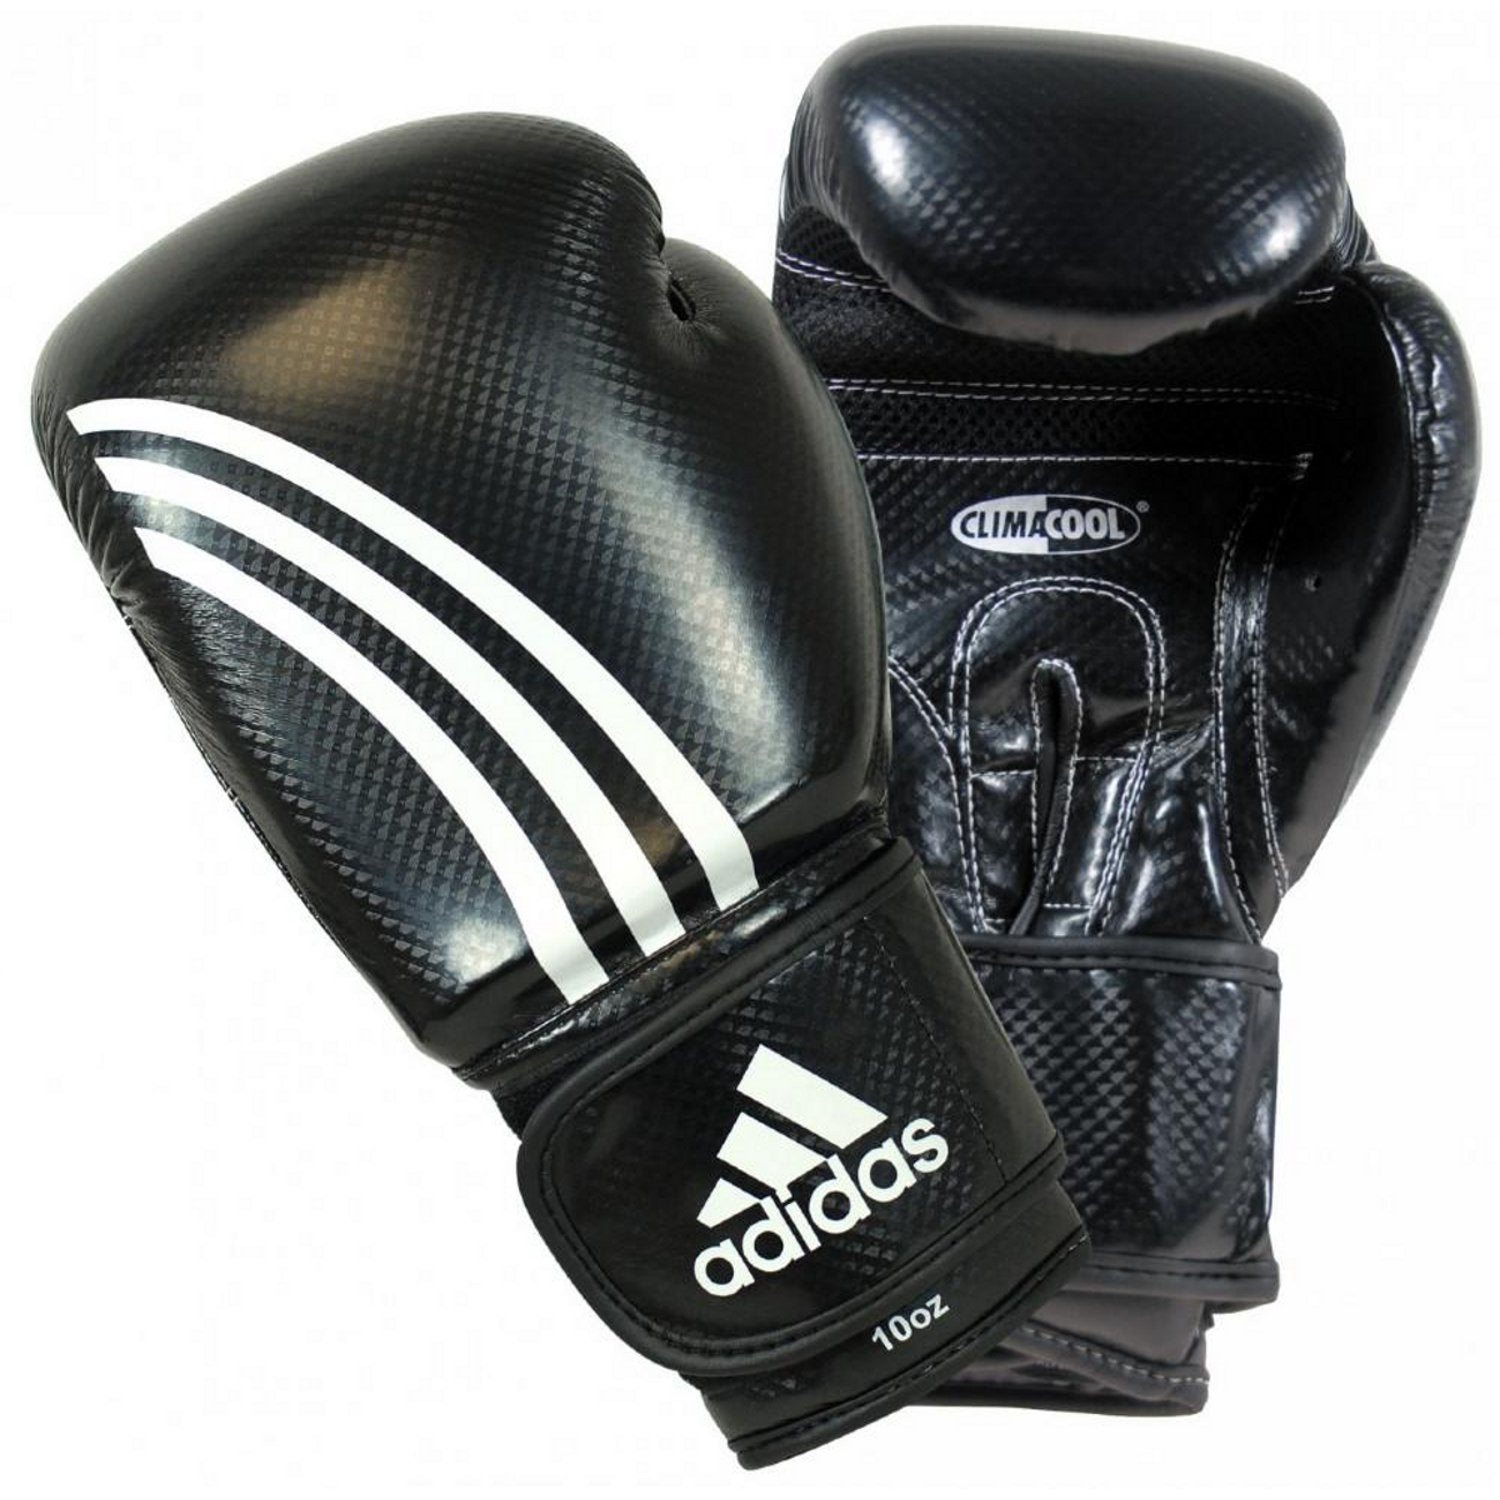 Climacool Boxing Gloves Outlet, SAVE 43% - mpgc.net